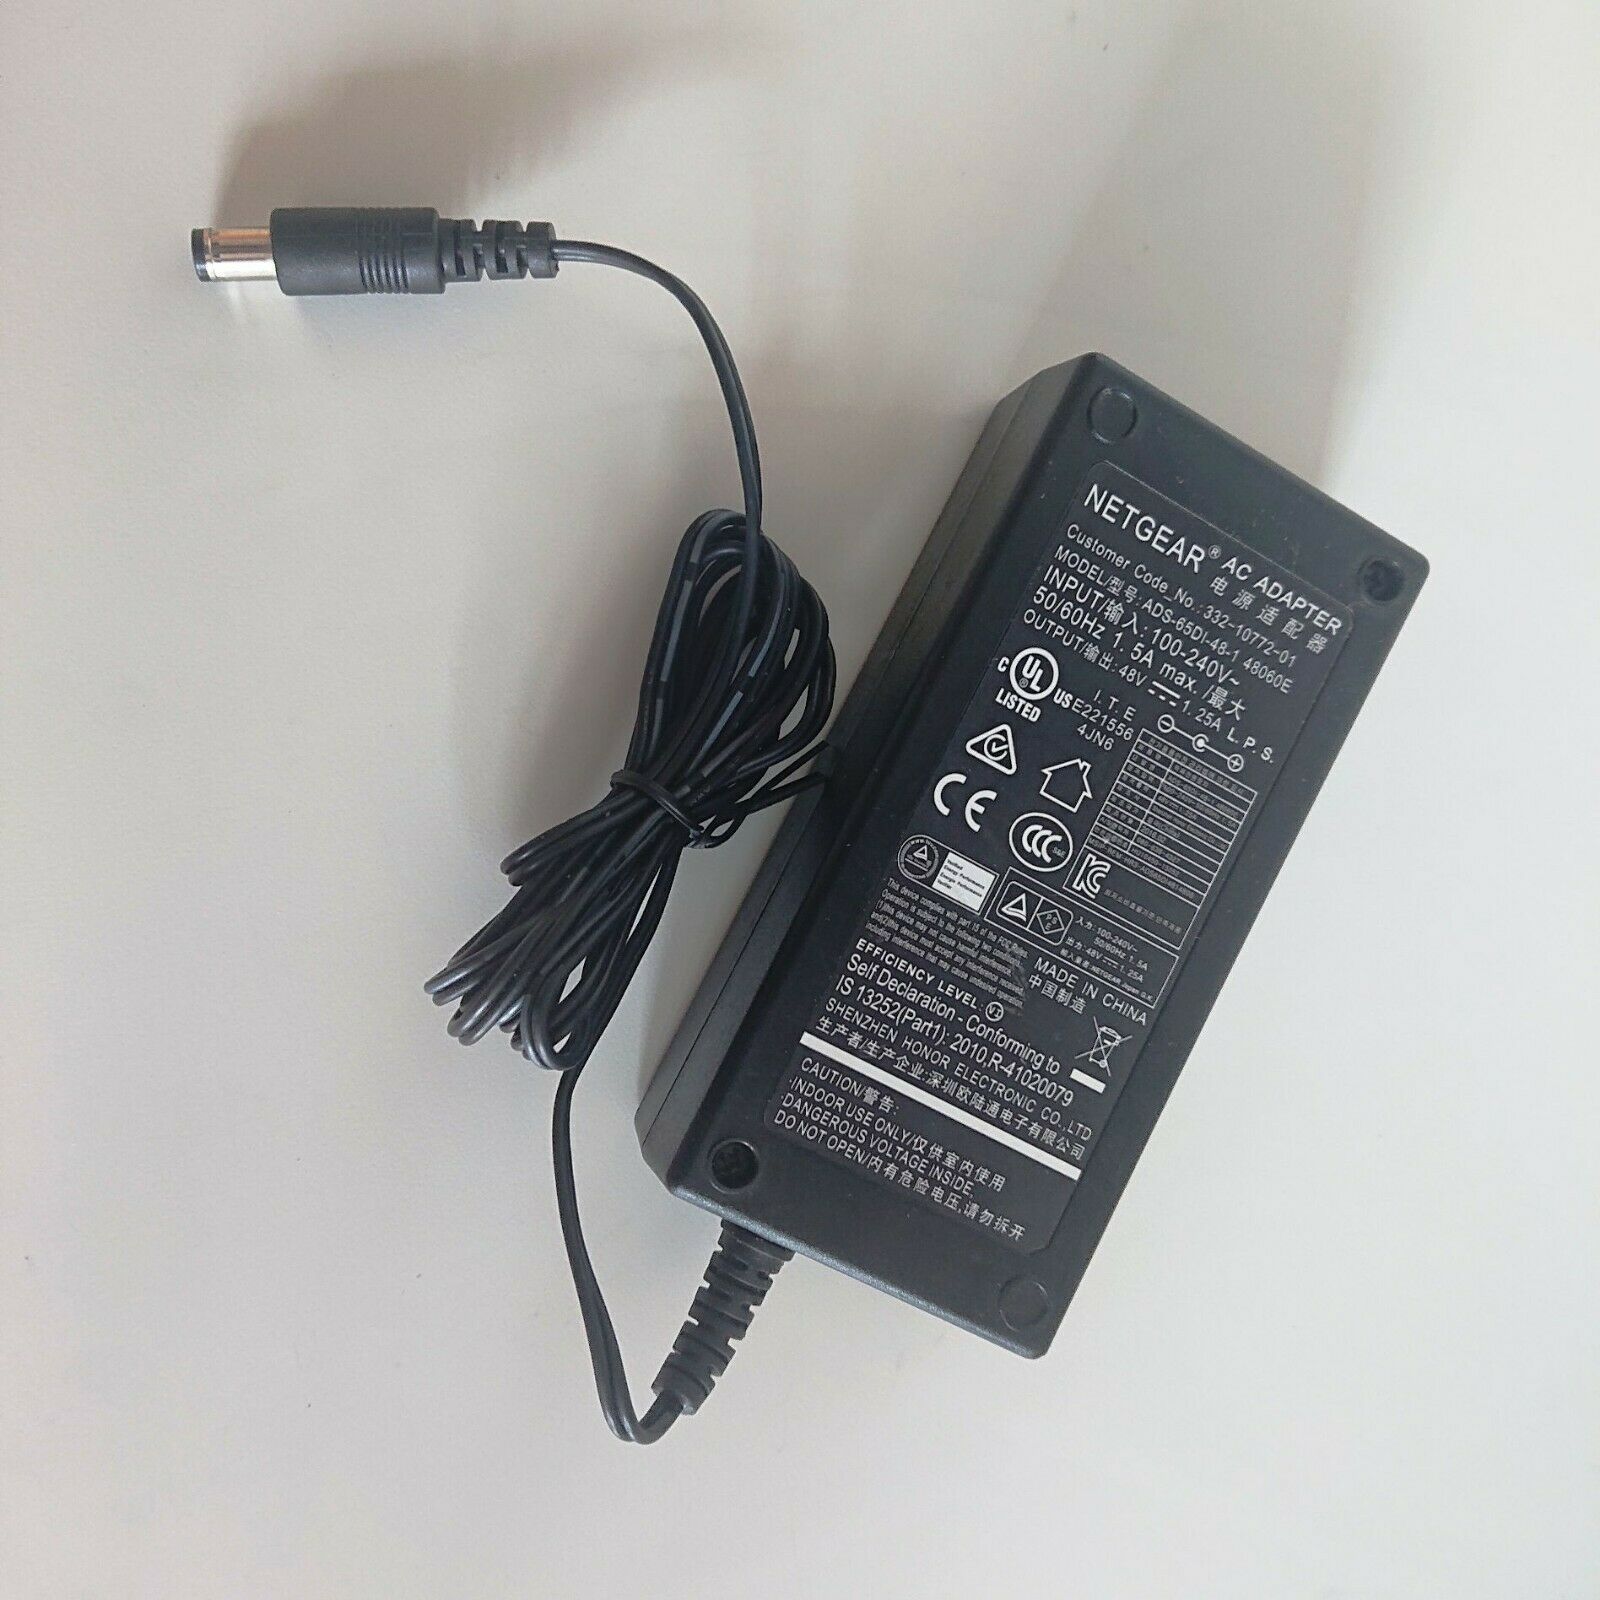 New 48V 1.25A 60W Netgear 332-10772-01 AC Power Adapter Charger ADS-65DI-48-1 48060E POWER SUPPLY